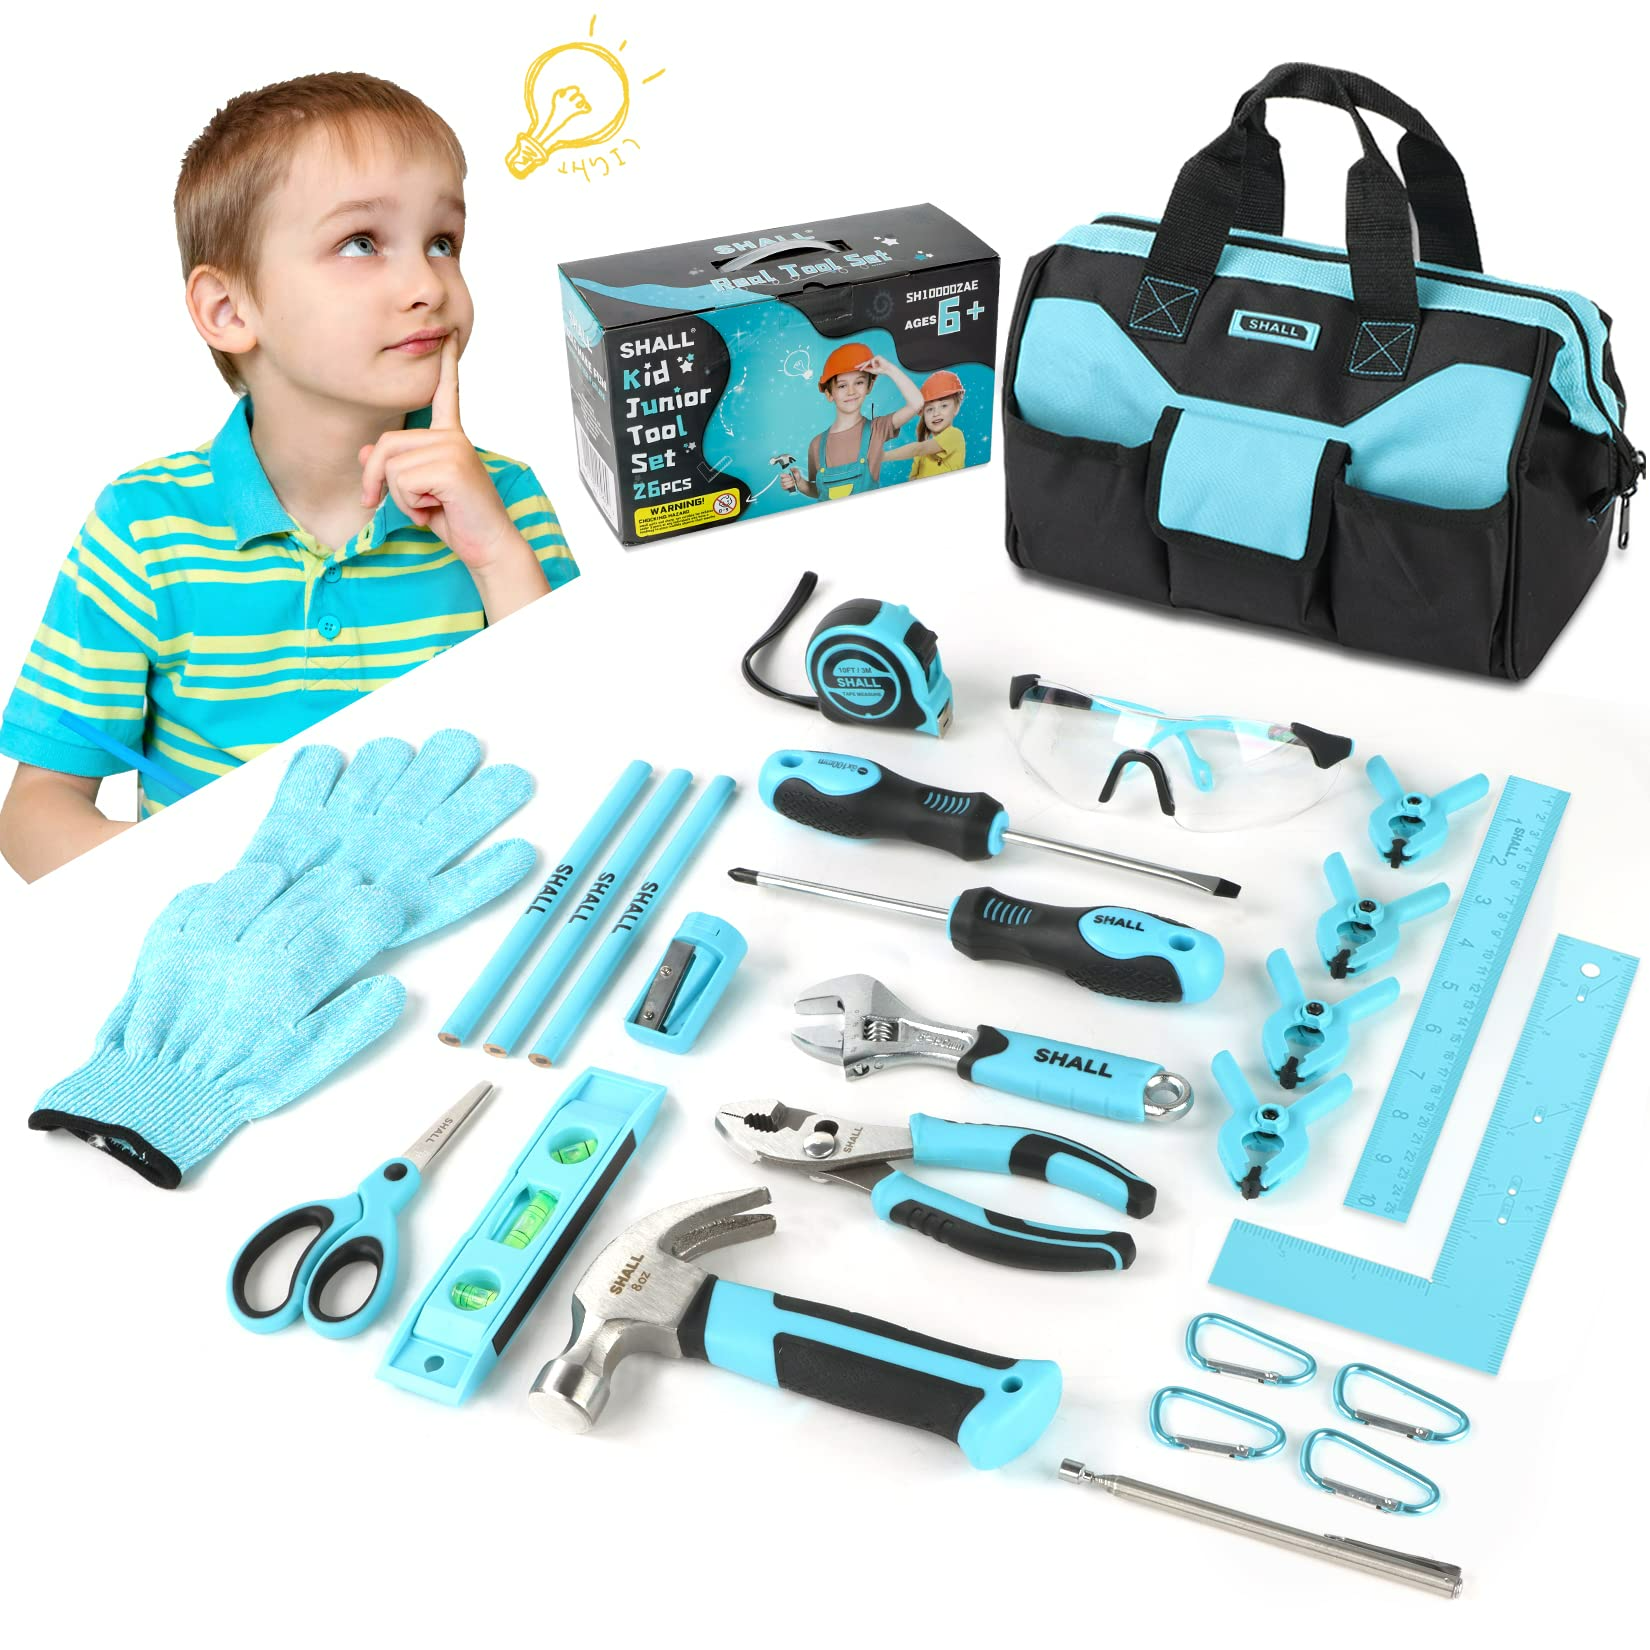 SHALL Kids Tool Set , 26-Piece Tool Kit with 12 Tool Bag, Real Tools for  kids Starter Set Boys & Girls Age 6+, DIY Building, Woodwork, Construction